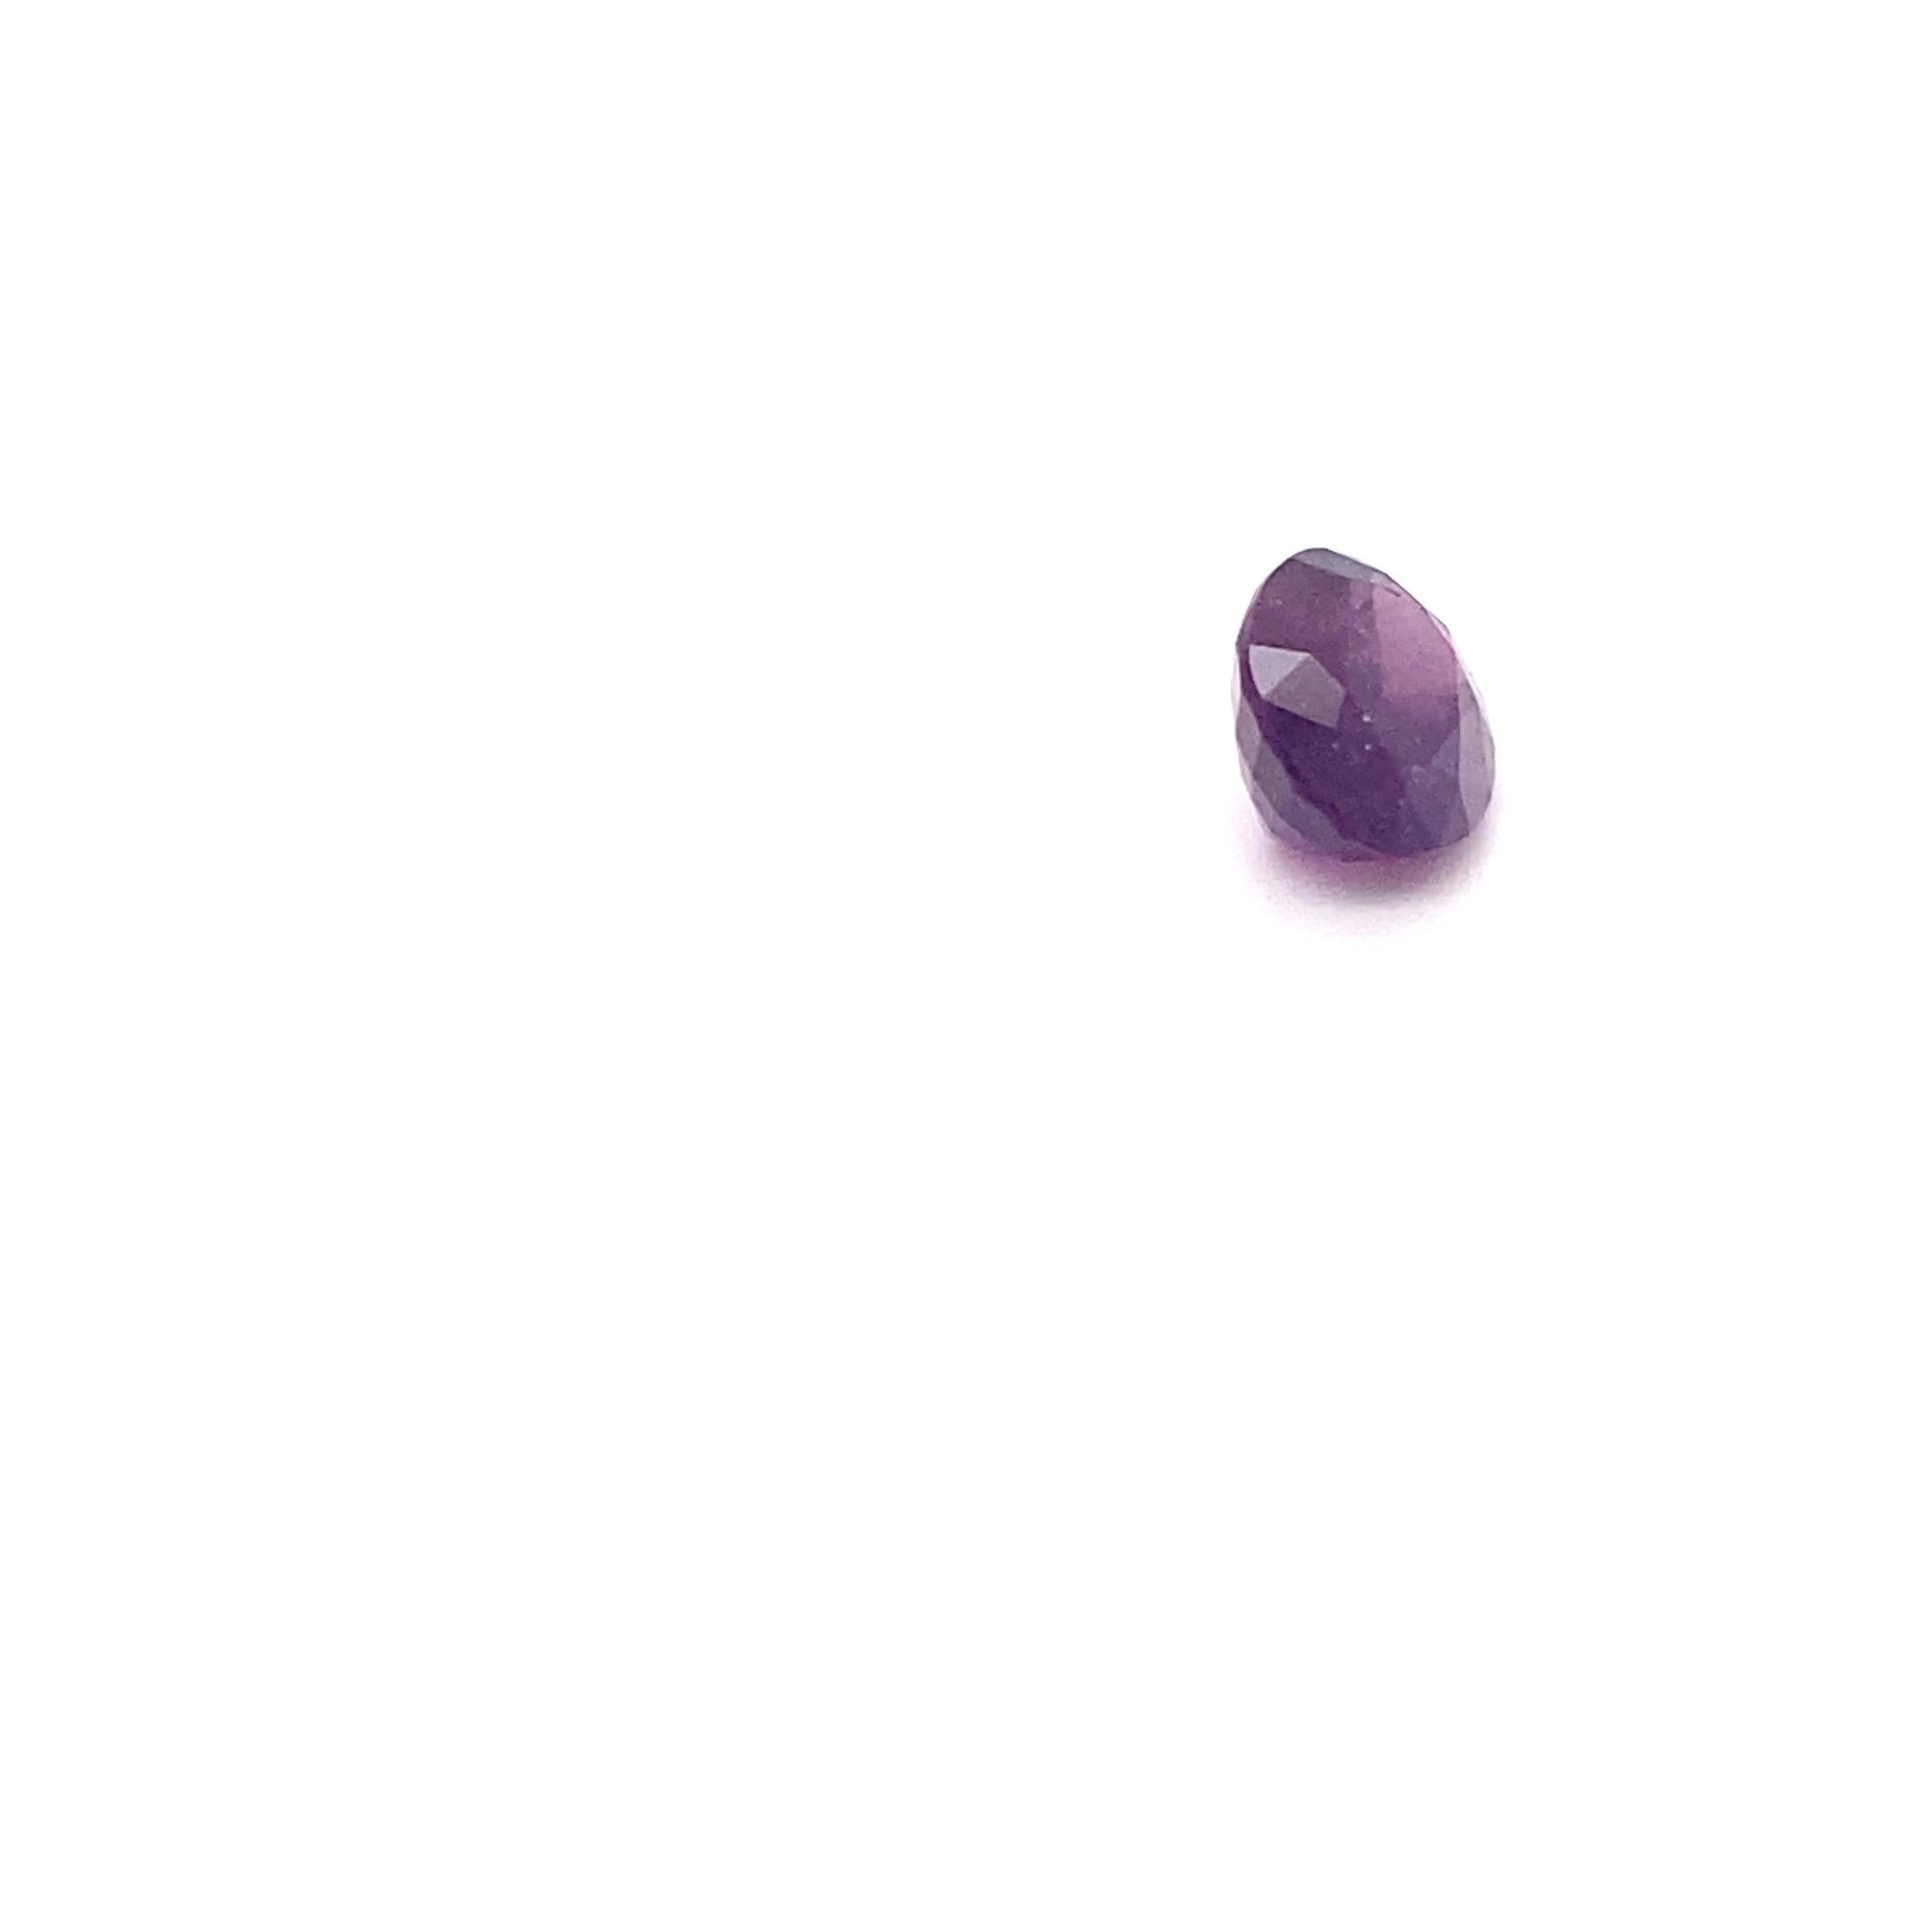 Women's or Men's GIA Certified 5.94 Carat Oval Shape Natural Pink Purple Sapphire Loose Gemstone For Sale